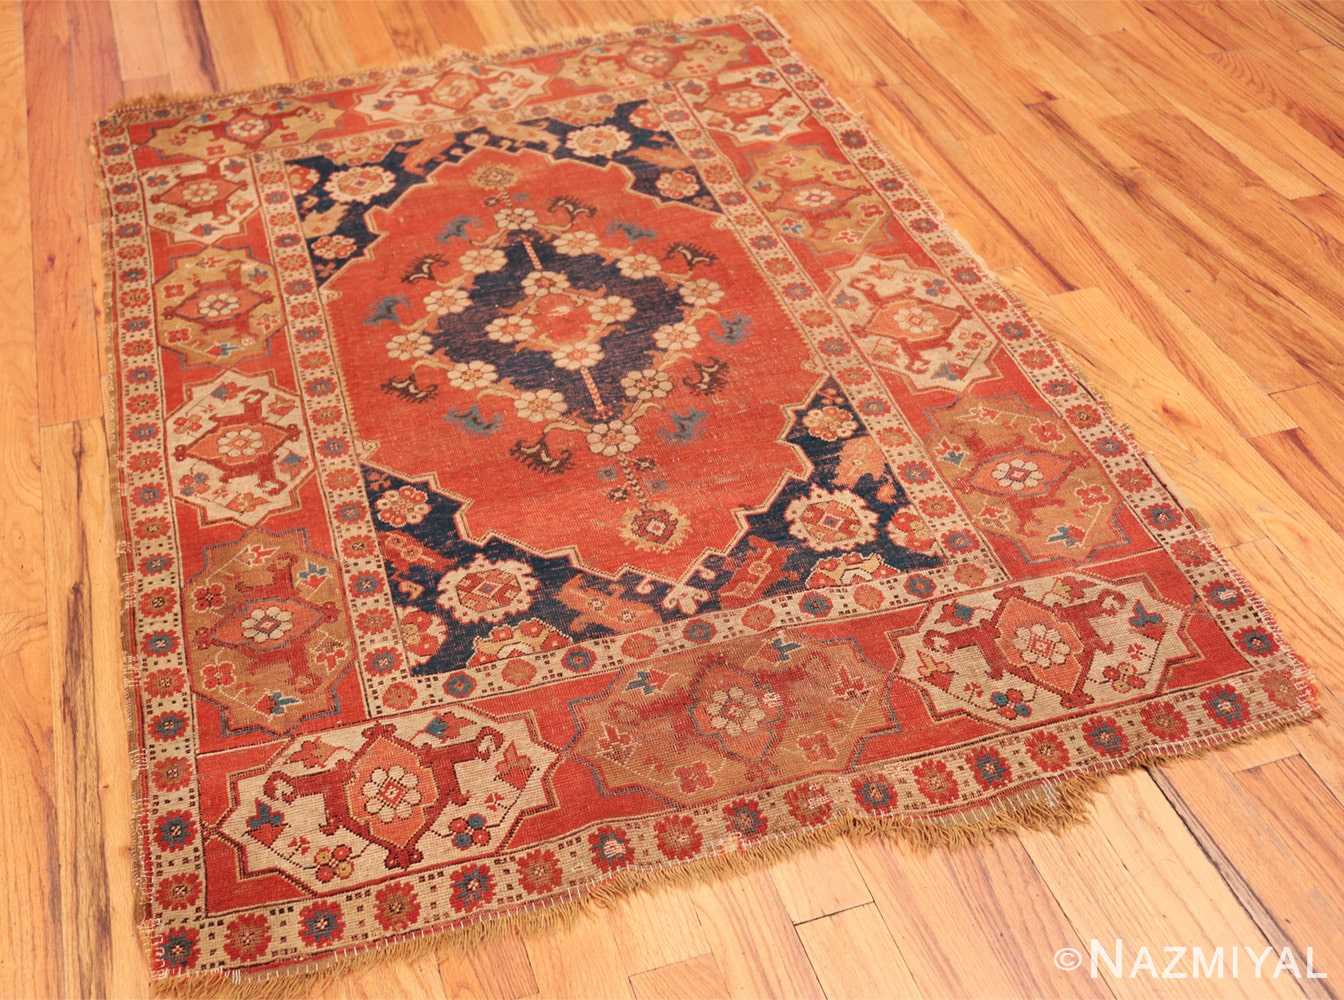 Full 17th century antique Transylvanian rug 70169 by Nazmiyal antique rugs collection